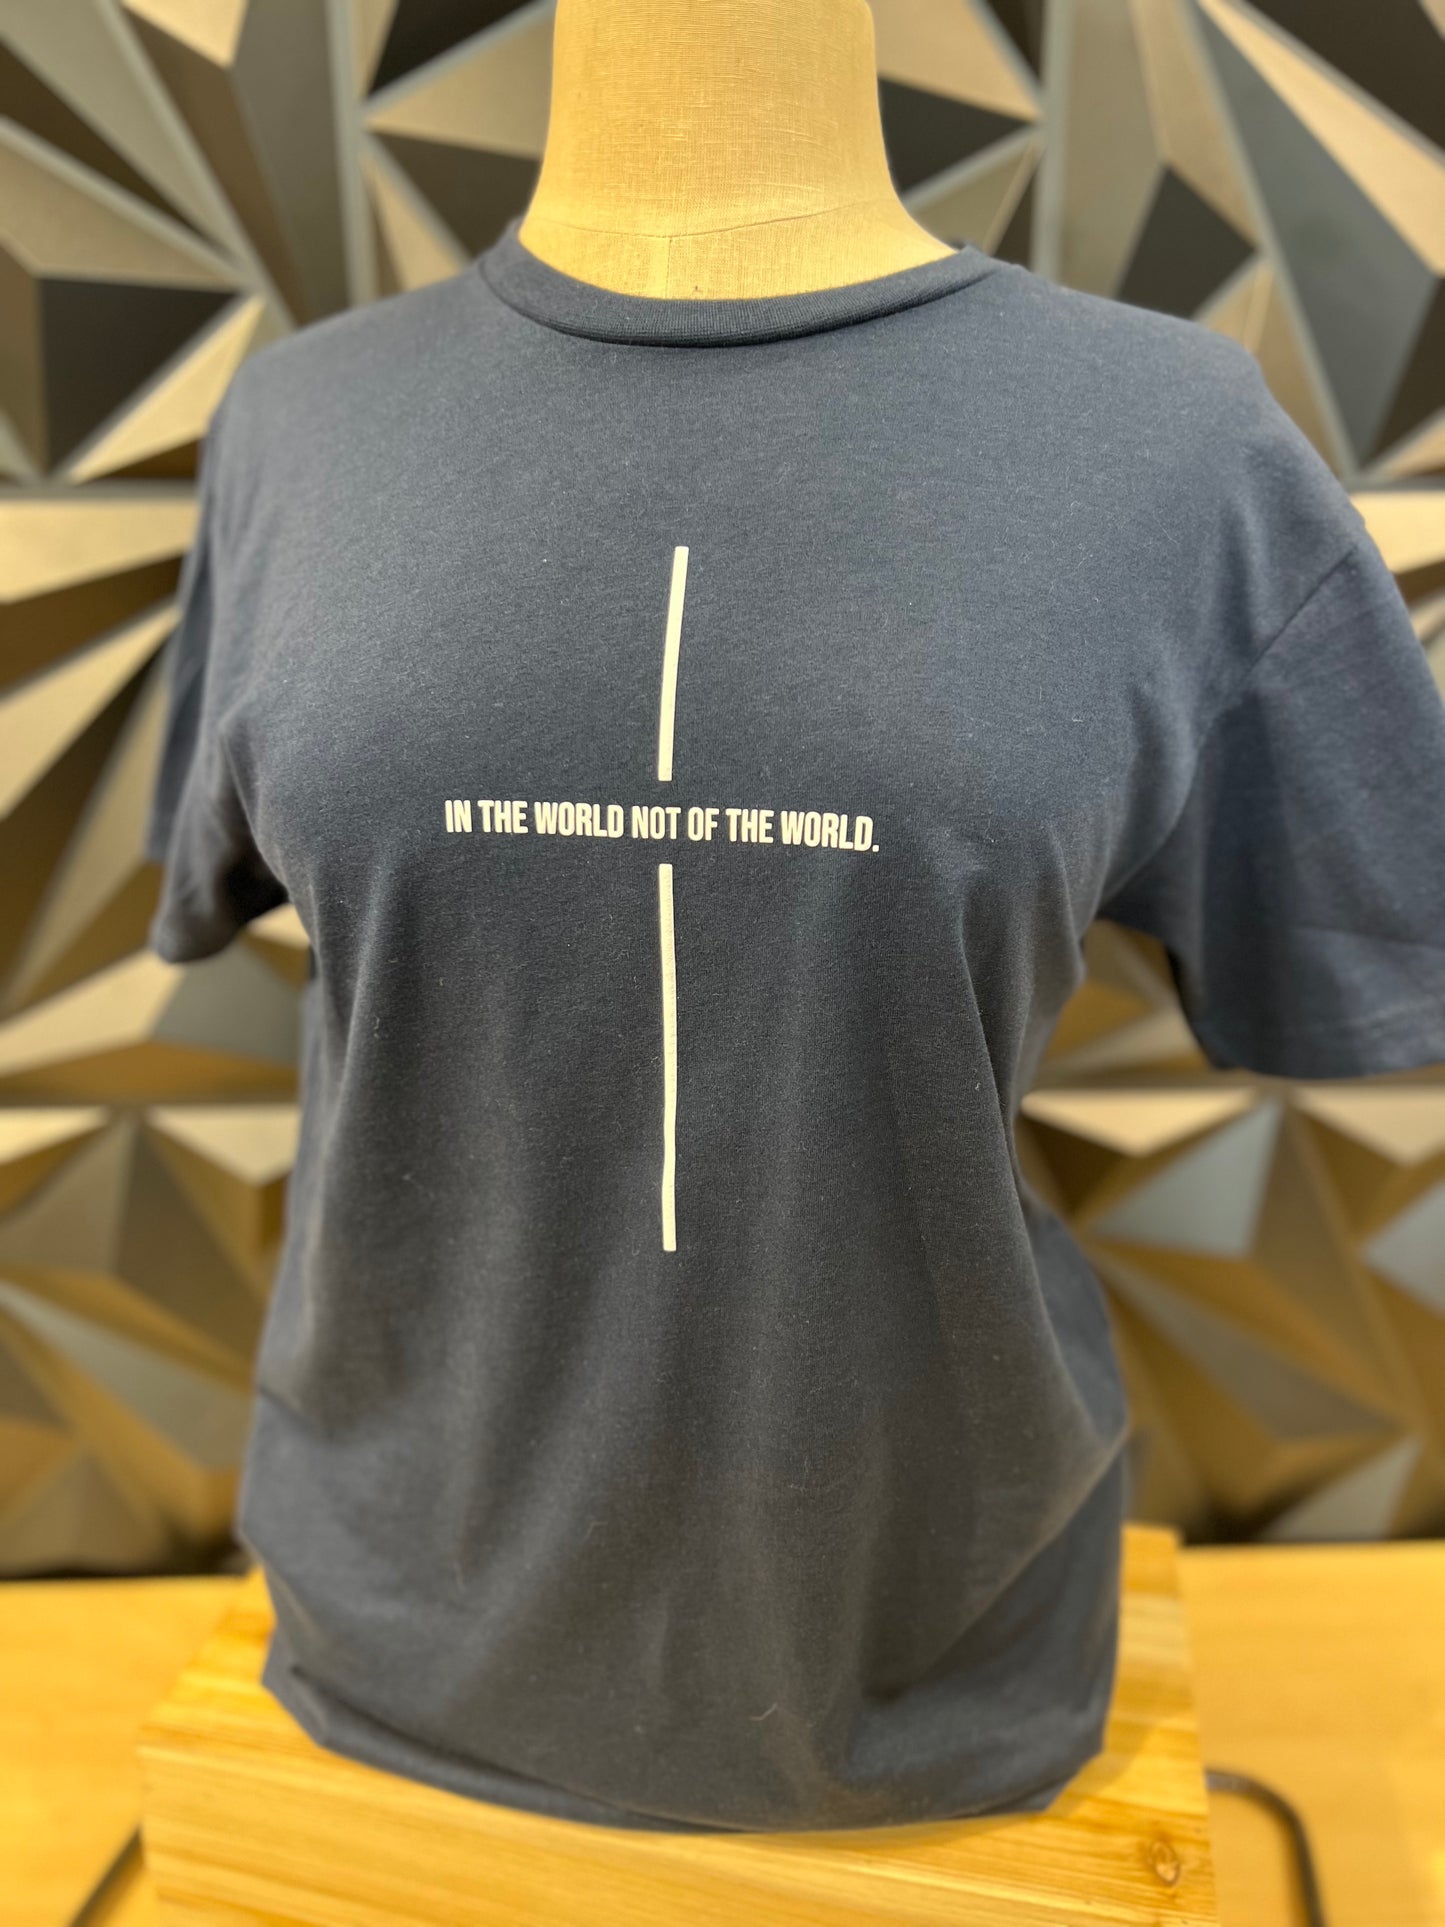 dark blue-grey tshirt with a white line down the middle and words across it to look like a cross - the words say In the world no of the world.